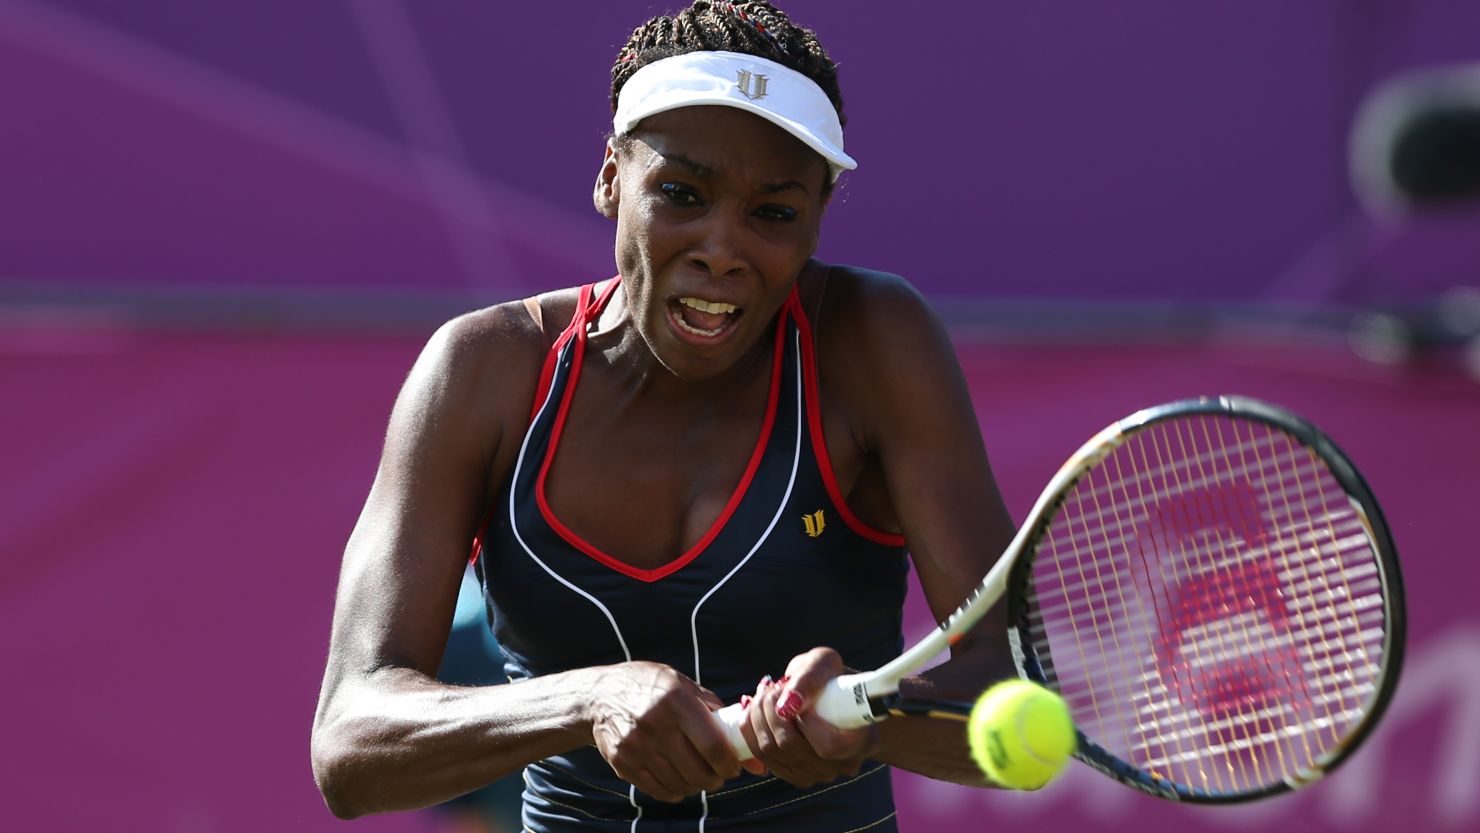 Venus Williams crashed out of the Olympic tennis tournament to Germany's Angelique Kerber